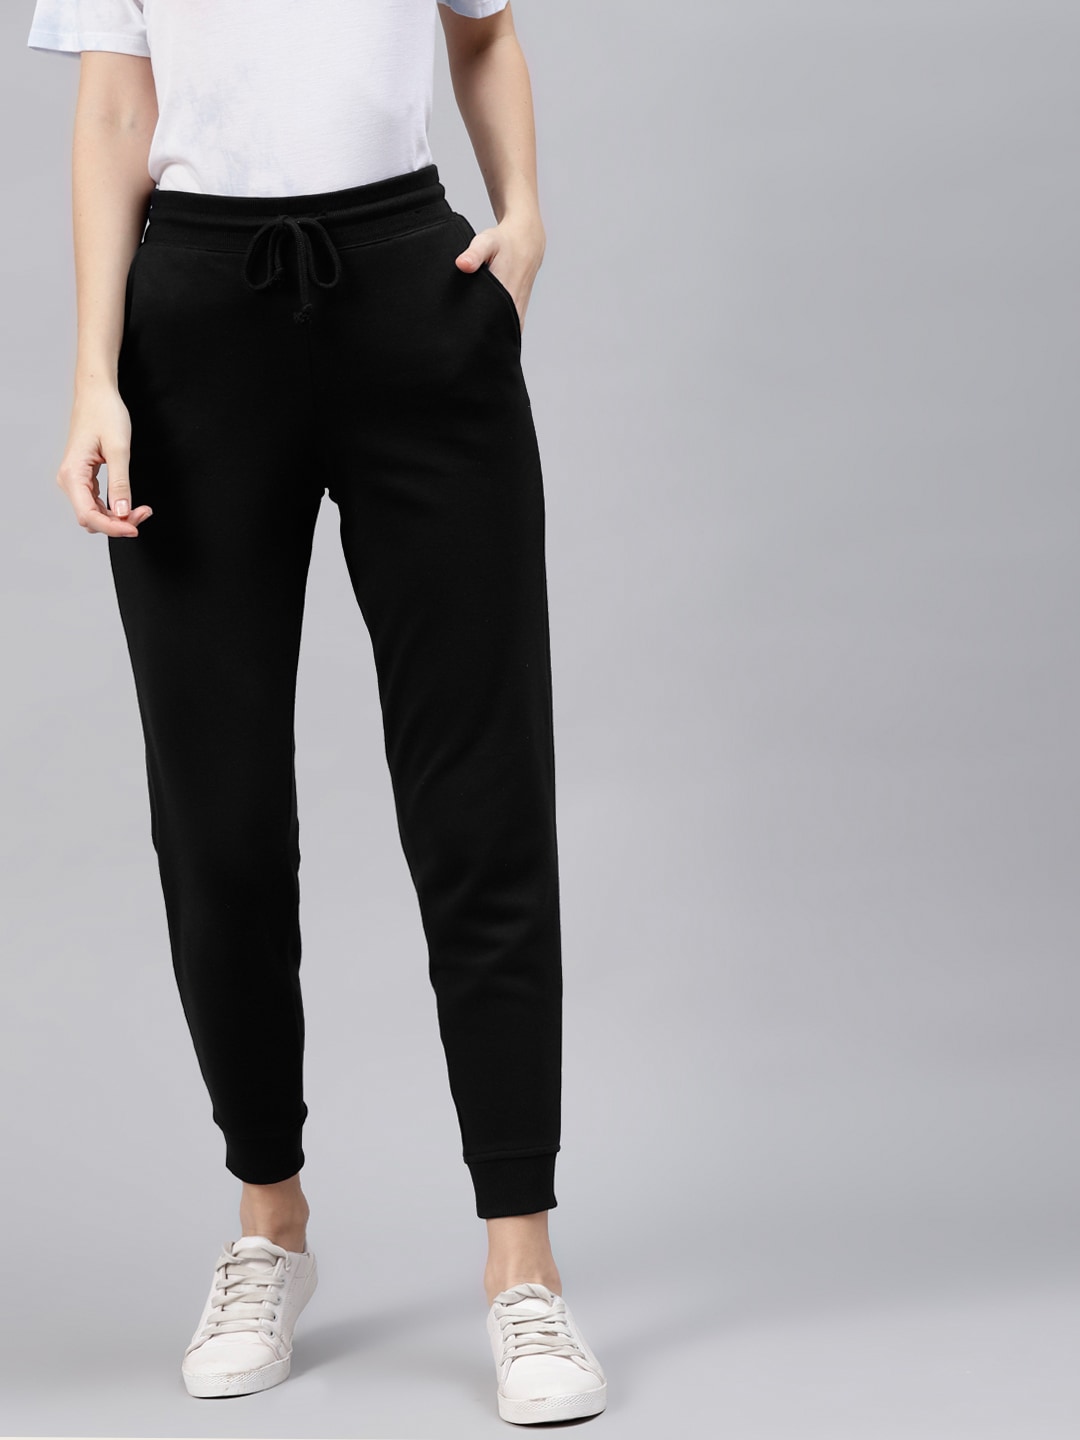 Marks & Spencer Women Black Joggers Track Pants Price in India